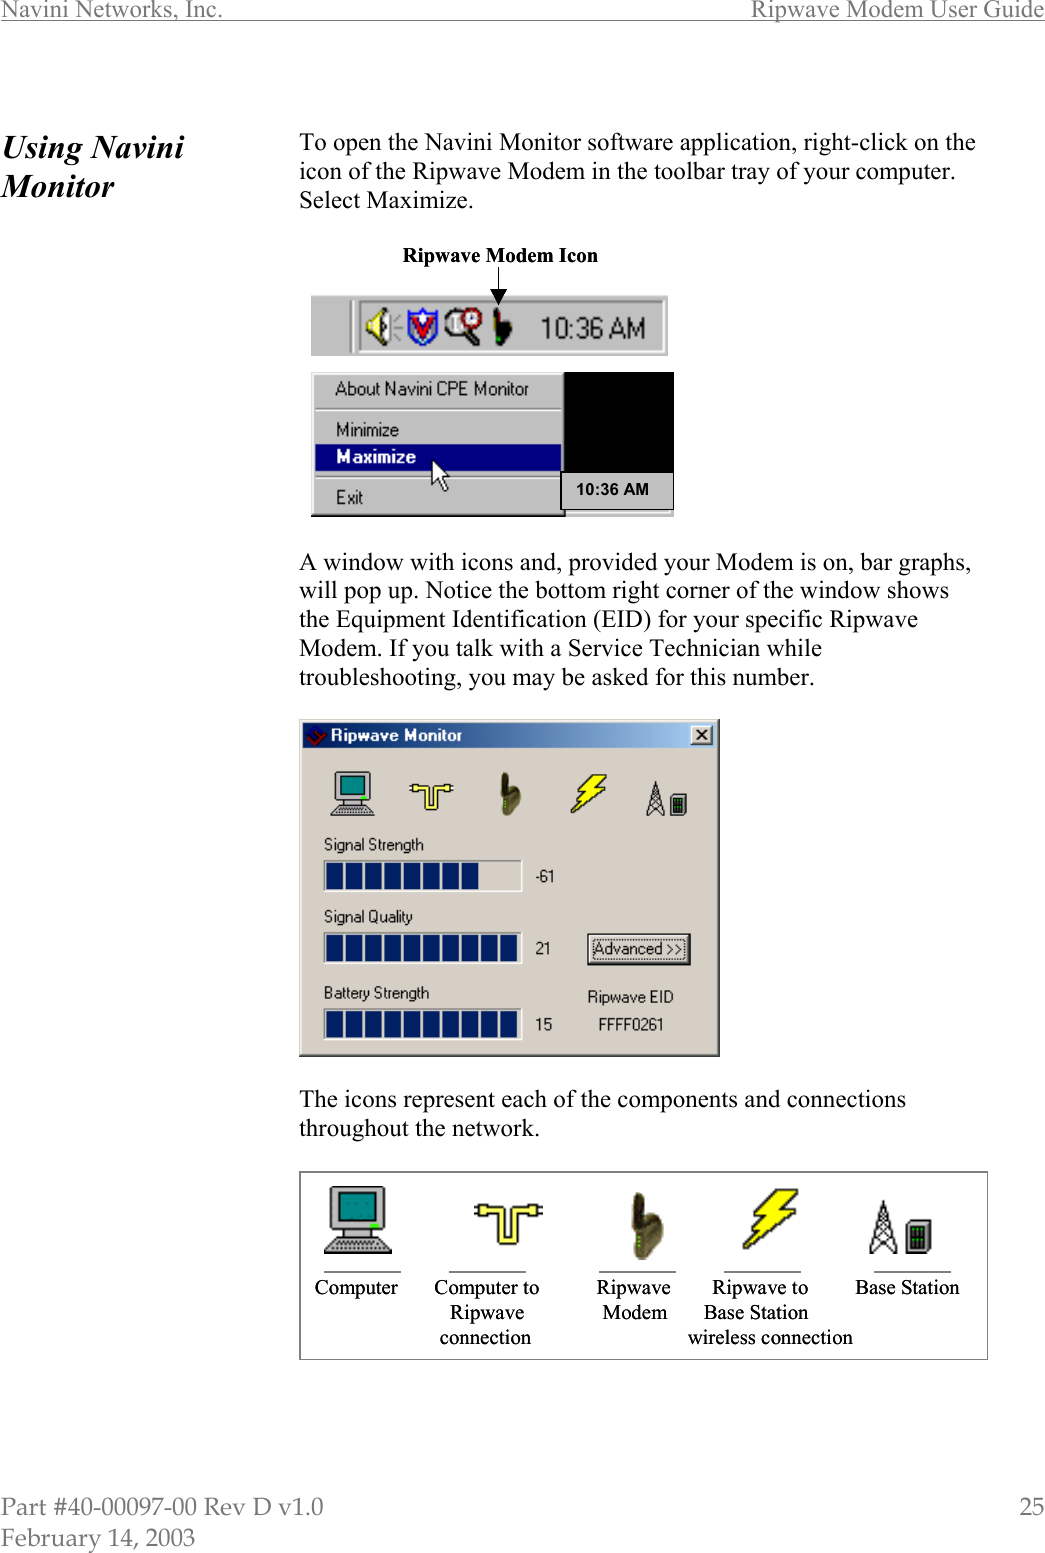 Navini Networks, Inc.        Ripwave Modem User Guide Part #40-00097-00 Rev D v1.0                         25 February 14, 2003  Using Navini Monitor                                             To open the Navini Monitor software application, right-click on the icon of the Ripwave Modem in the toolbar tray of your computer. Select Maximize.    A window with icons and, provided your Modem is on, bar graphs, will pop up. Notice the bottom right corner of the window shows the Equipment Identification (EID) for your specific Ripwave Modem. If you talk with a Service Technician while troubleshooting, you may be asked for this number.   The icons represent each of the components and connections throughout the network.      Ripwave Modem Icon 10:36 AMRipwave Modem Icon 10:36 AMComputer       Computer to           Ripwave        Ripwave to   Base StationRipwave               Modem       Base Stationconnection                              wireless connection Computer       Computer to           Ripwave        Ripwave to   Base StationRipwave               Modem       Base Stationconnection                              wireless connection 